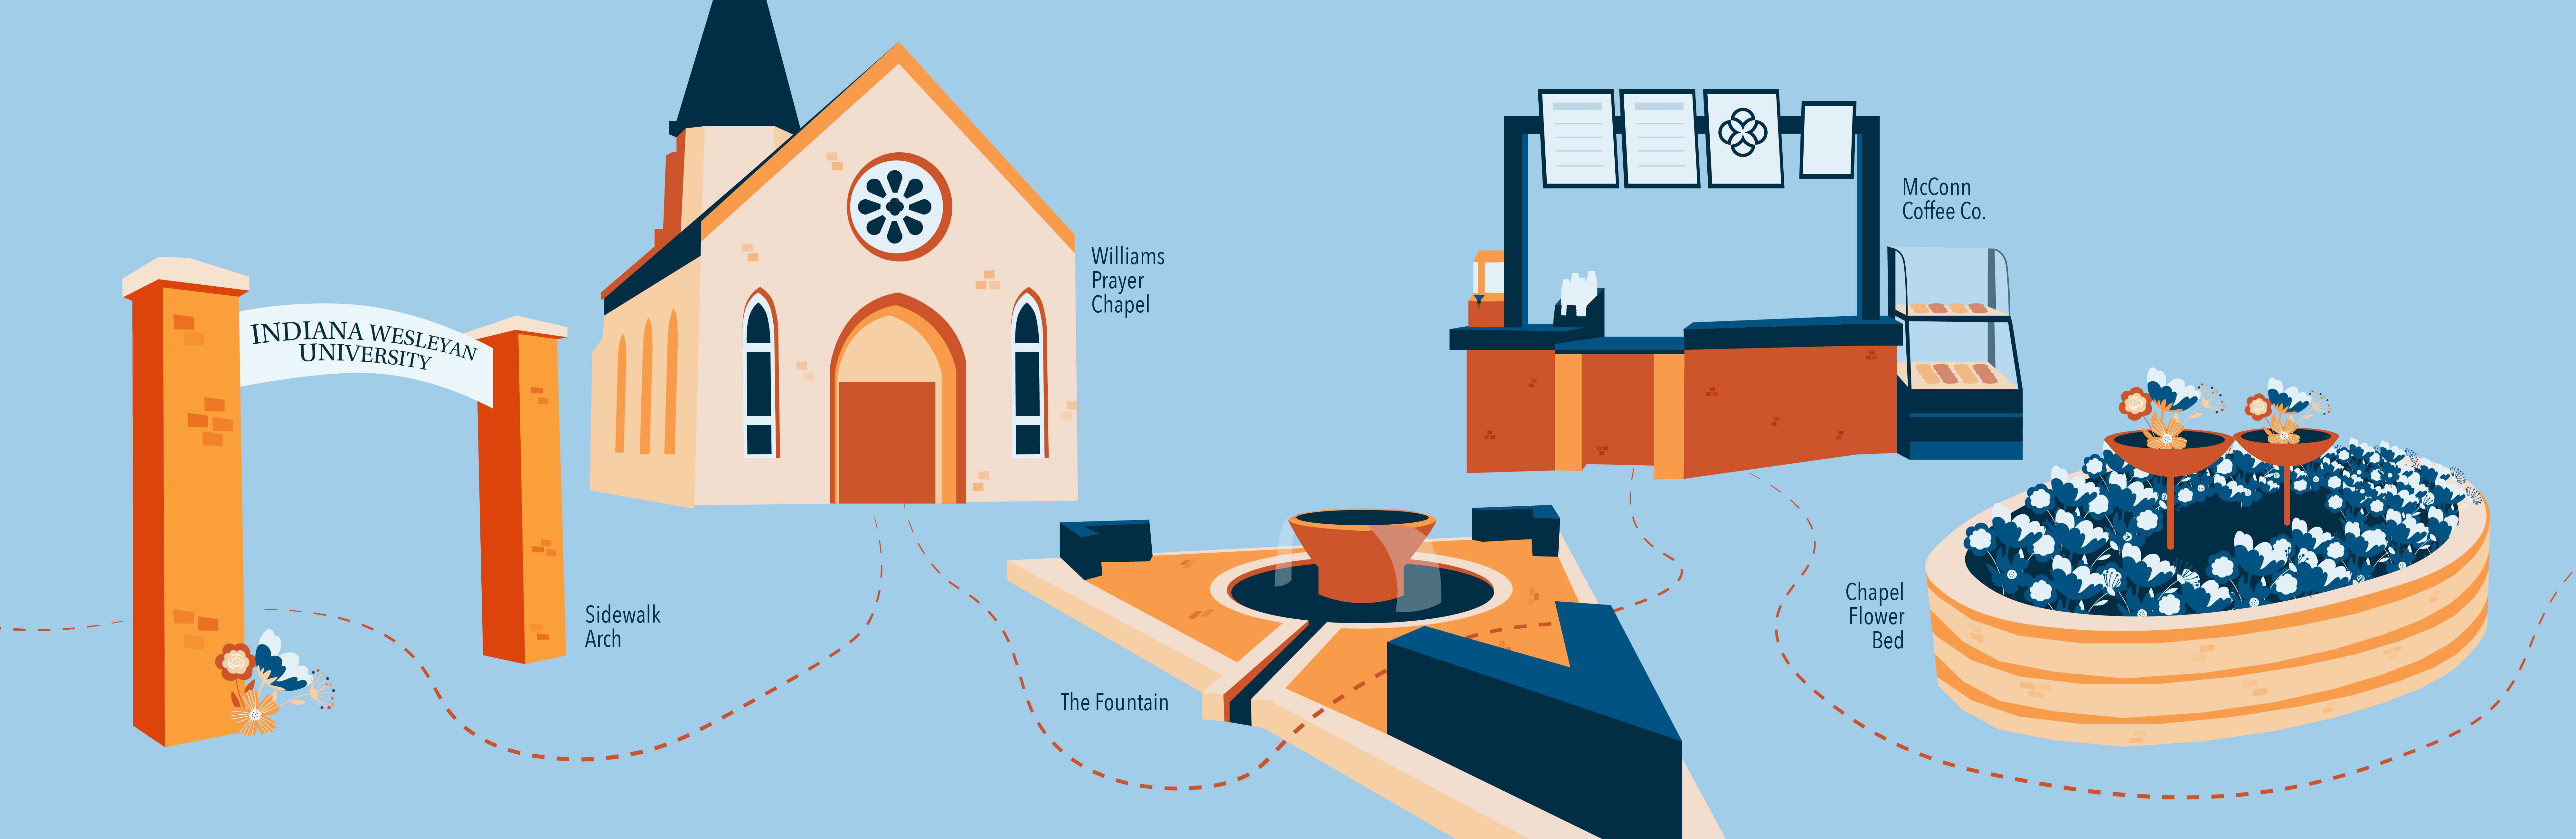 illustrated archway, fountain, prayer chapel, coffee shop, and flower bed in shades of blue and orange